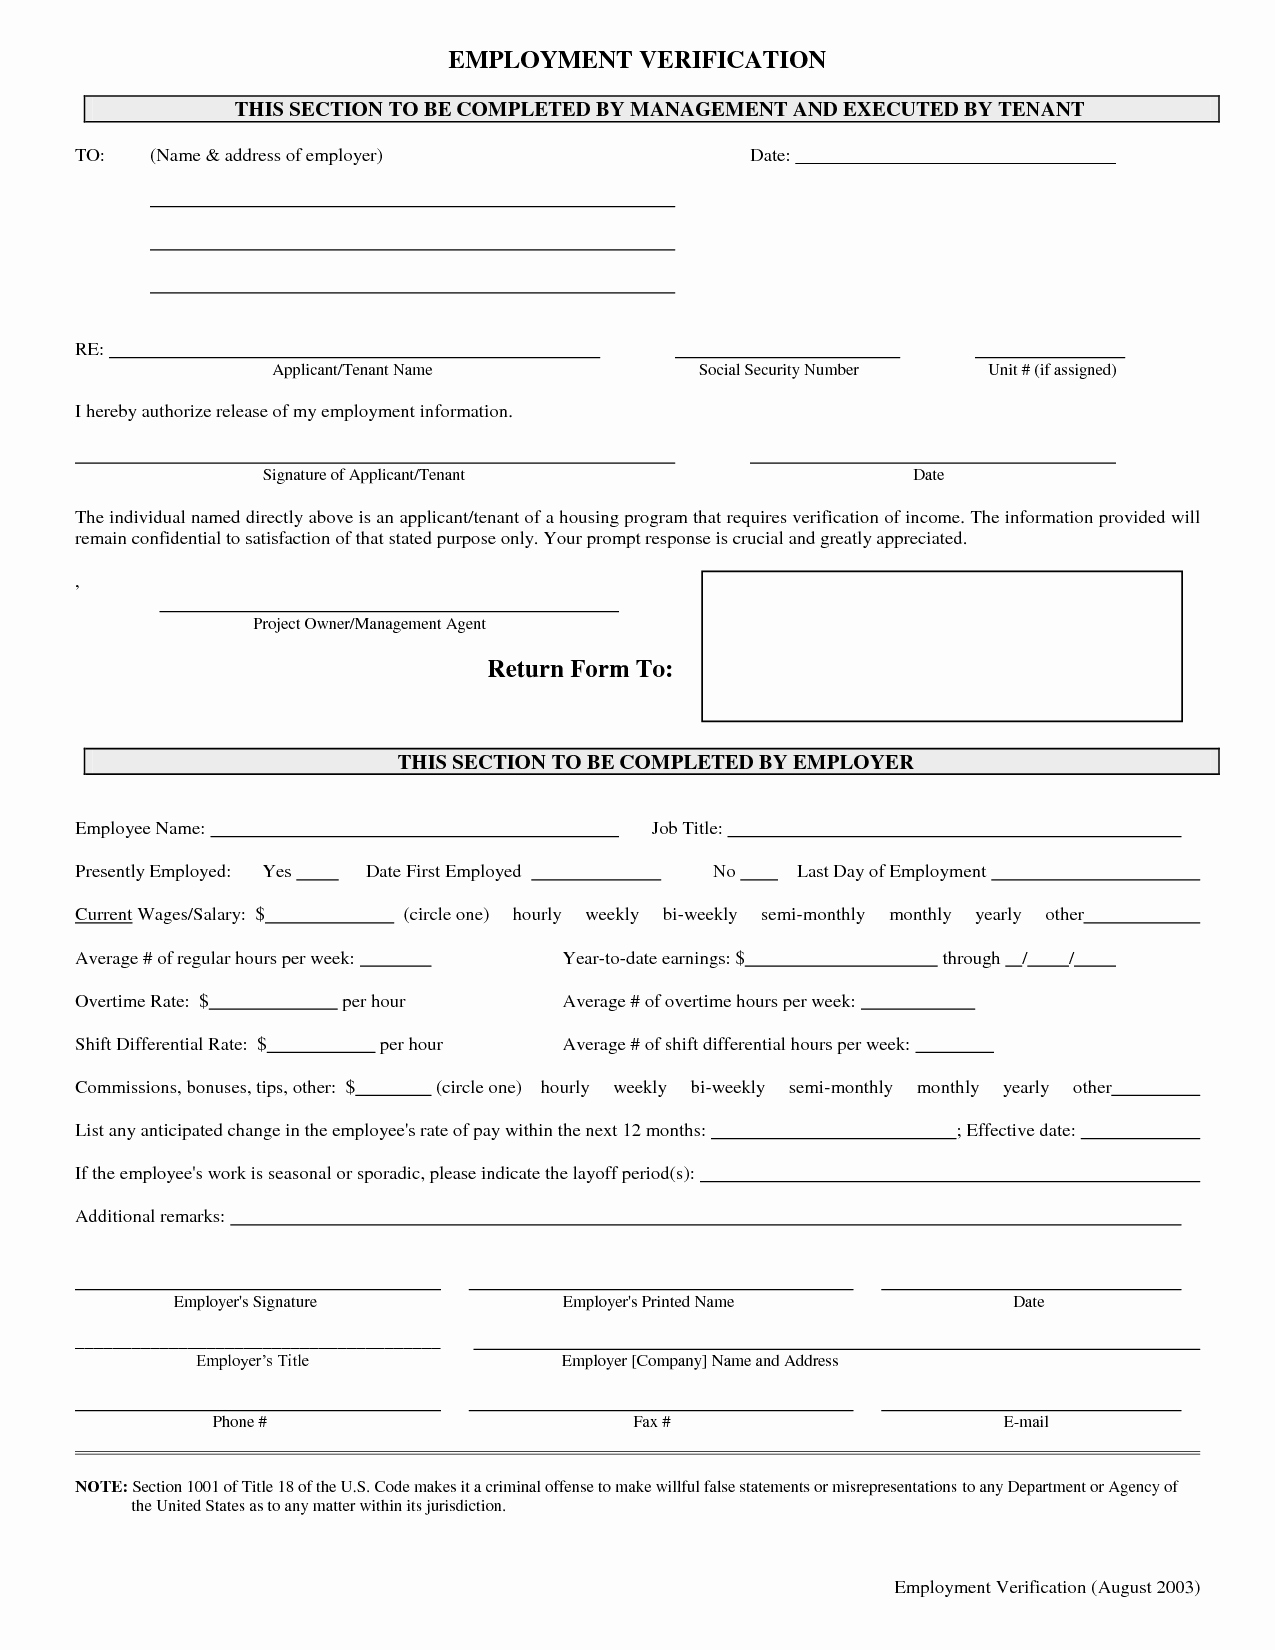 Free Employee Verification form Template Awesome Verification Of Employment form